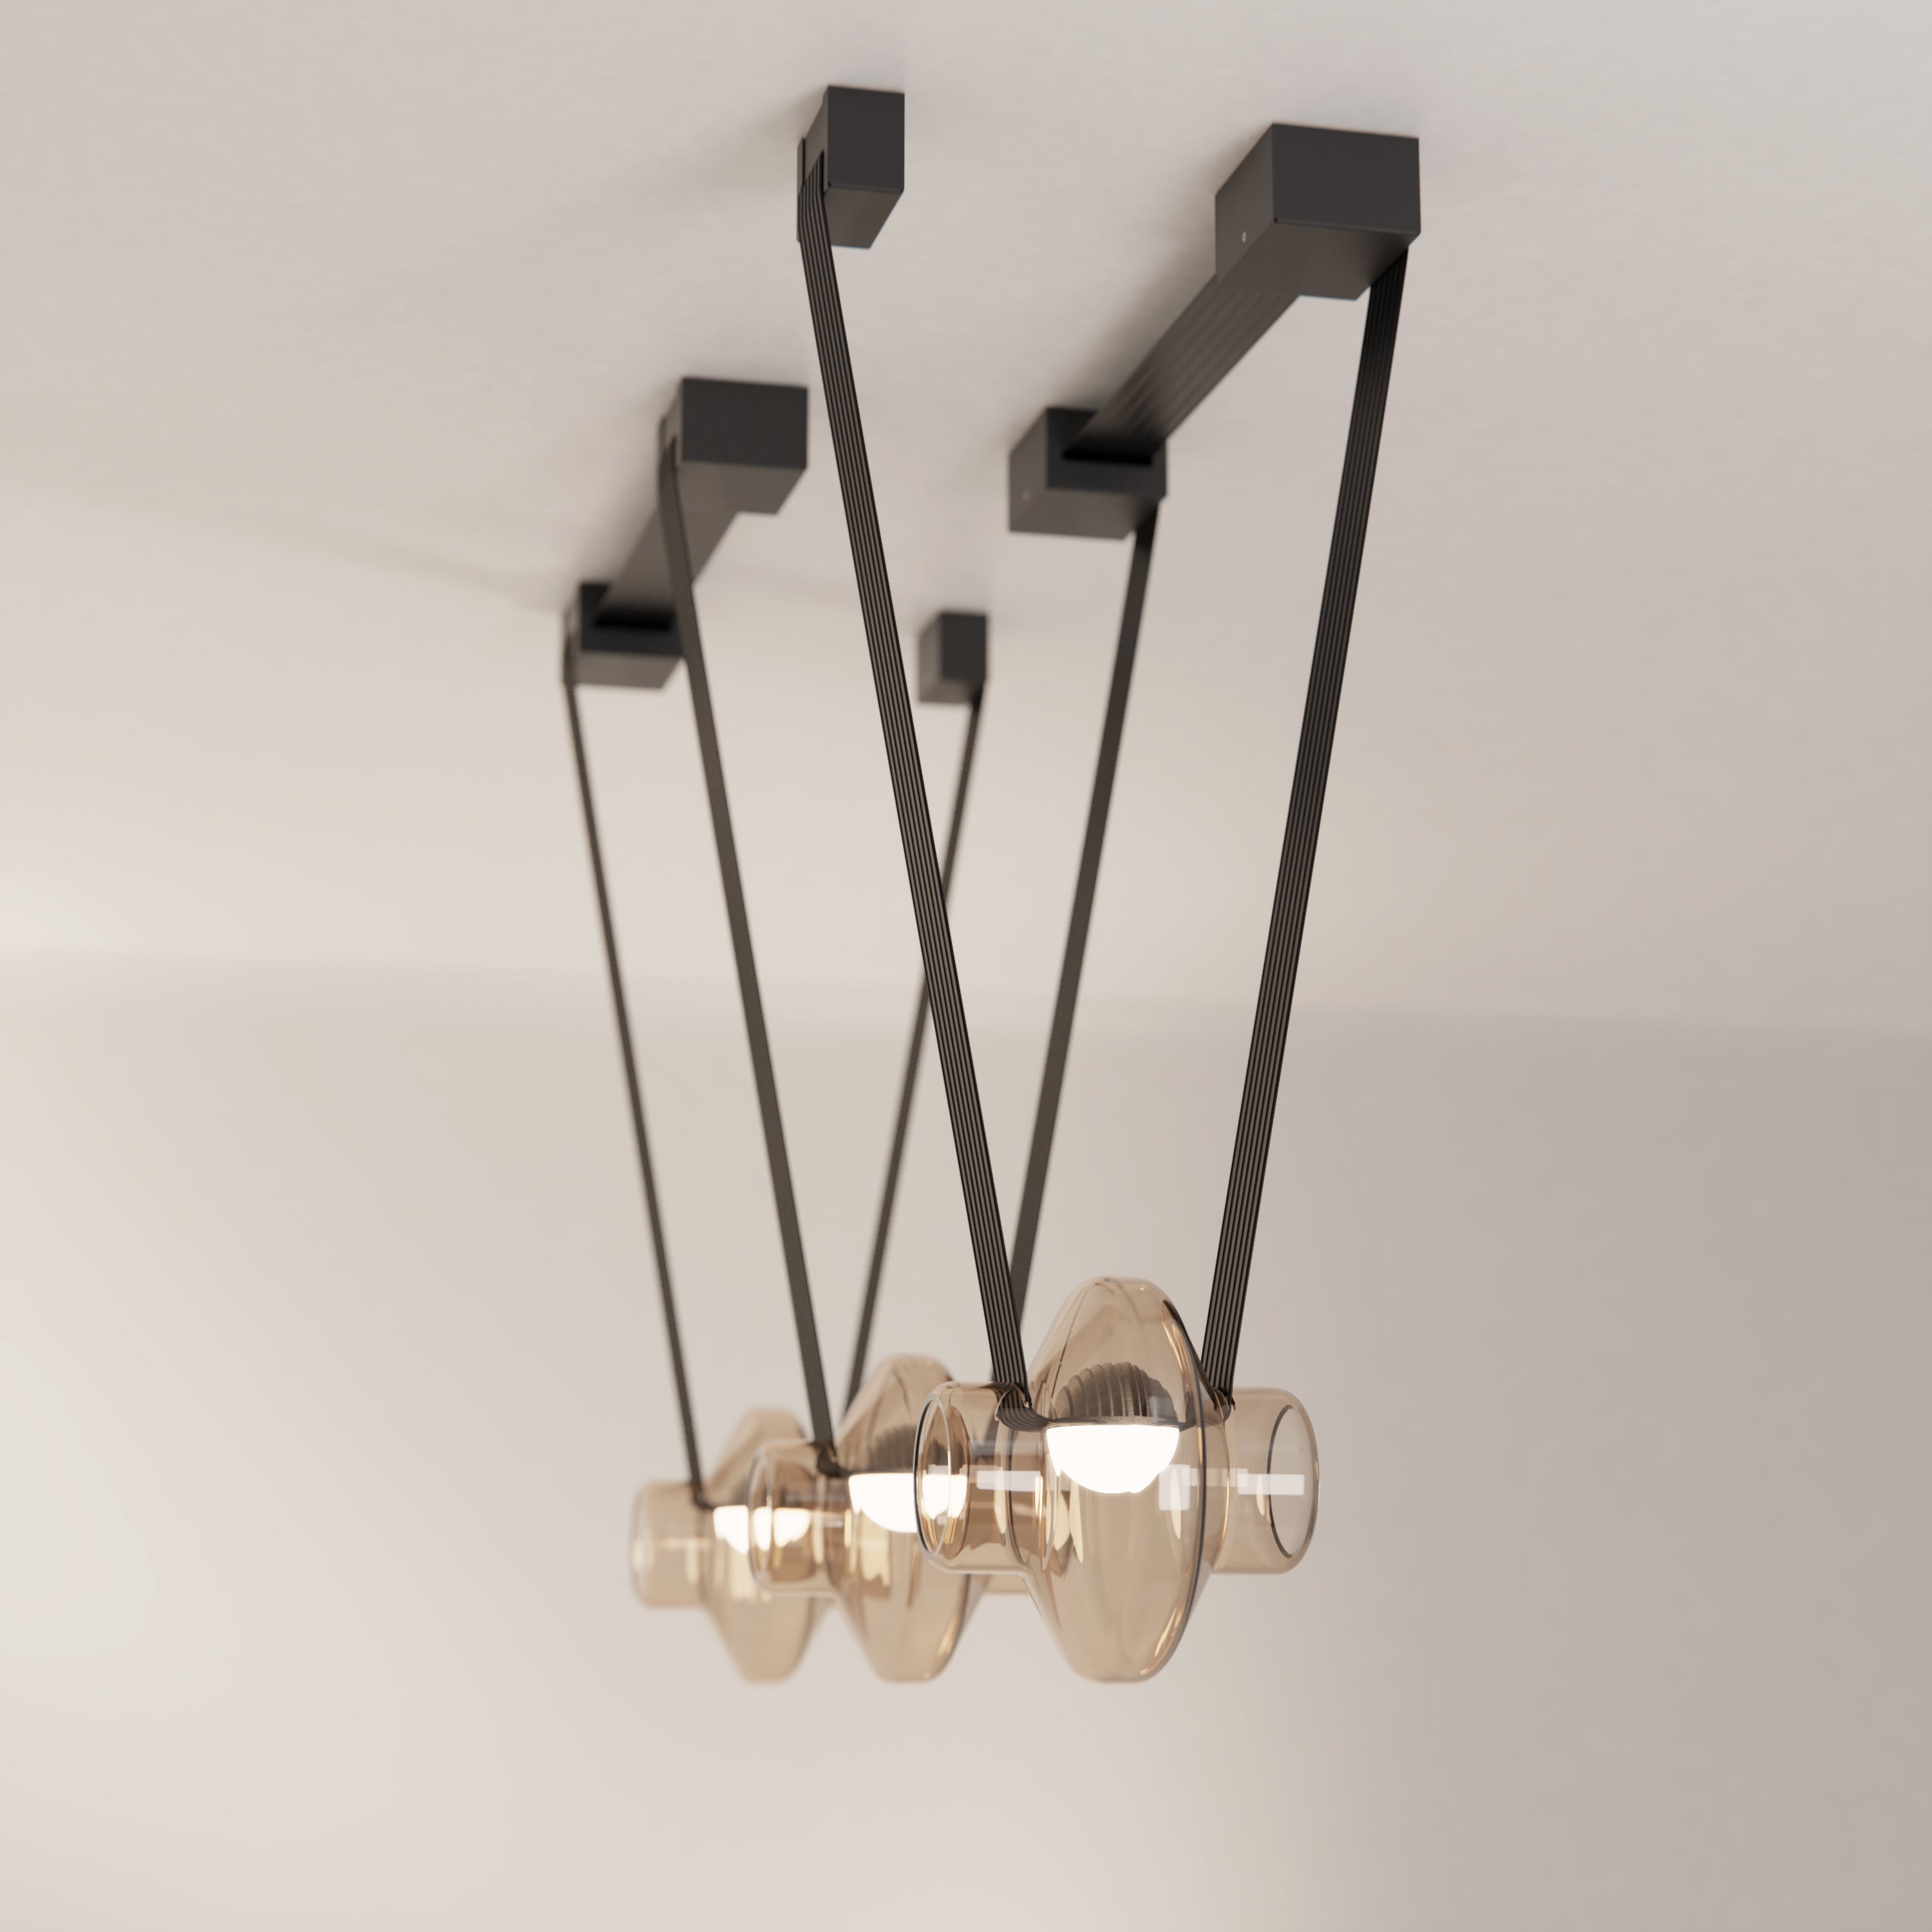 Etat-des-Lieux Pink Glass 3B Pendant, Contemporary Adaptive Lighting System In New Condition For Sale In Morin-Heights, CA